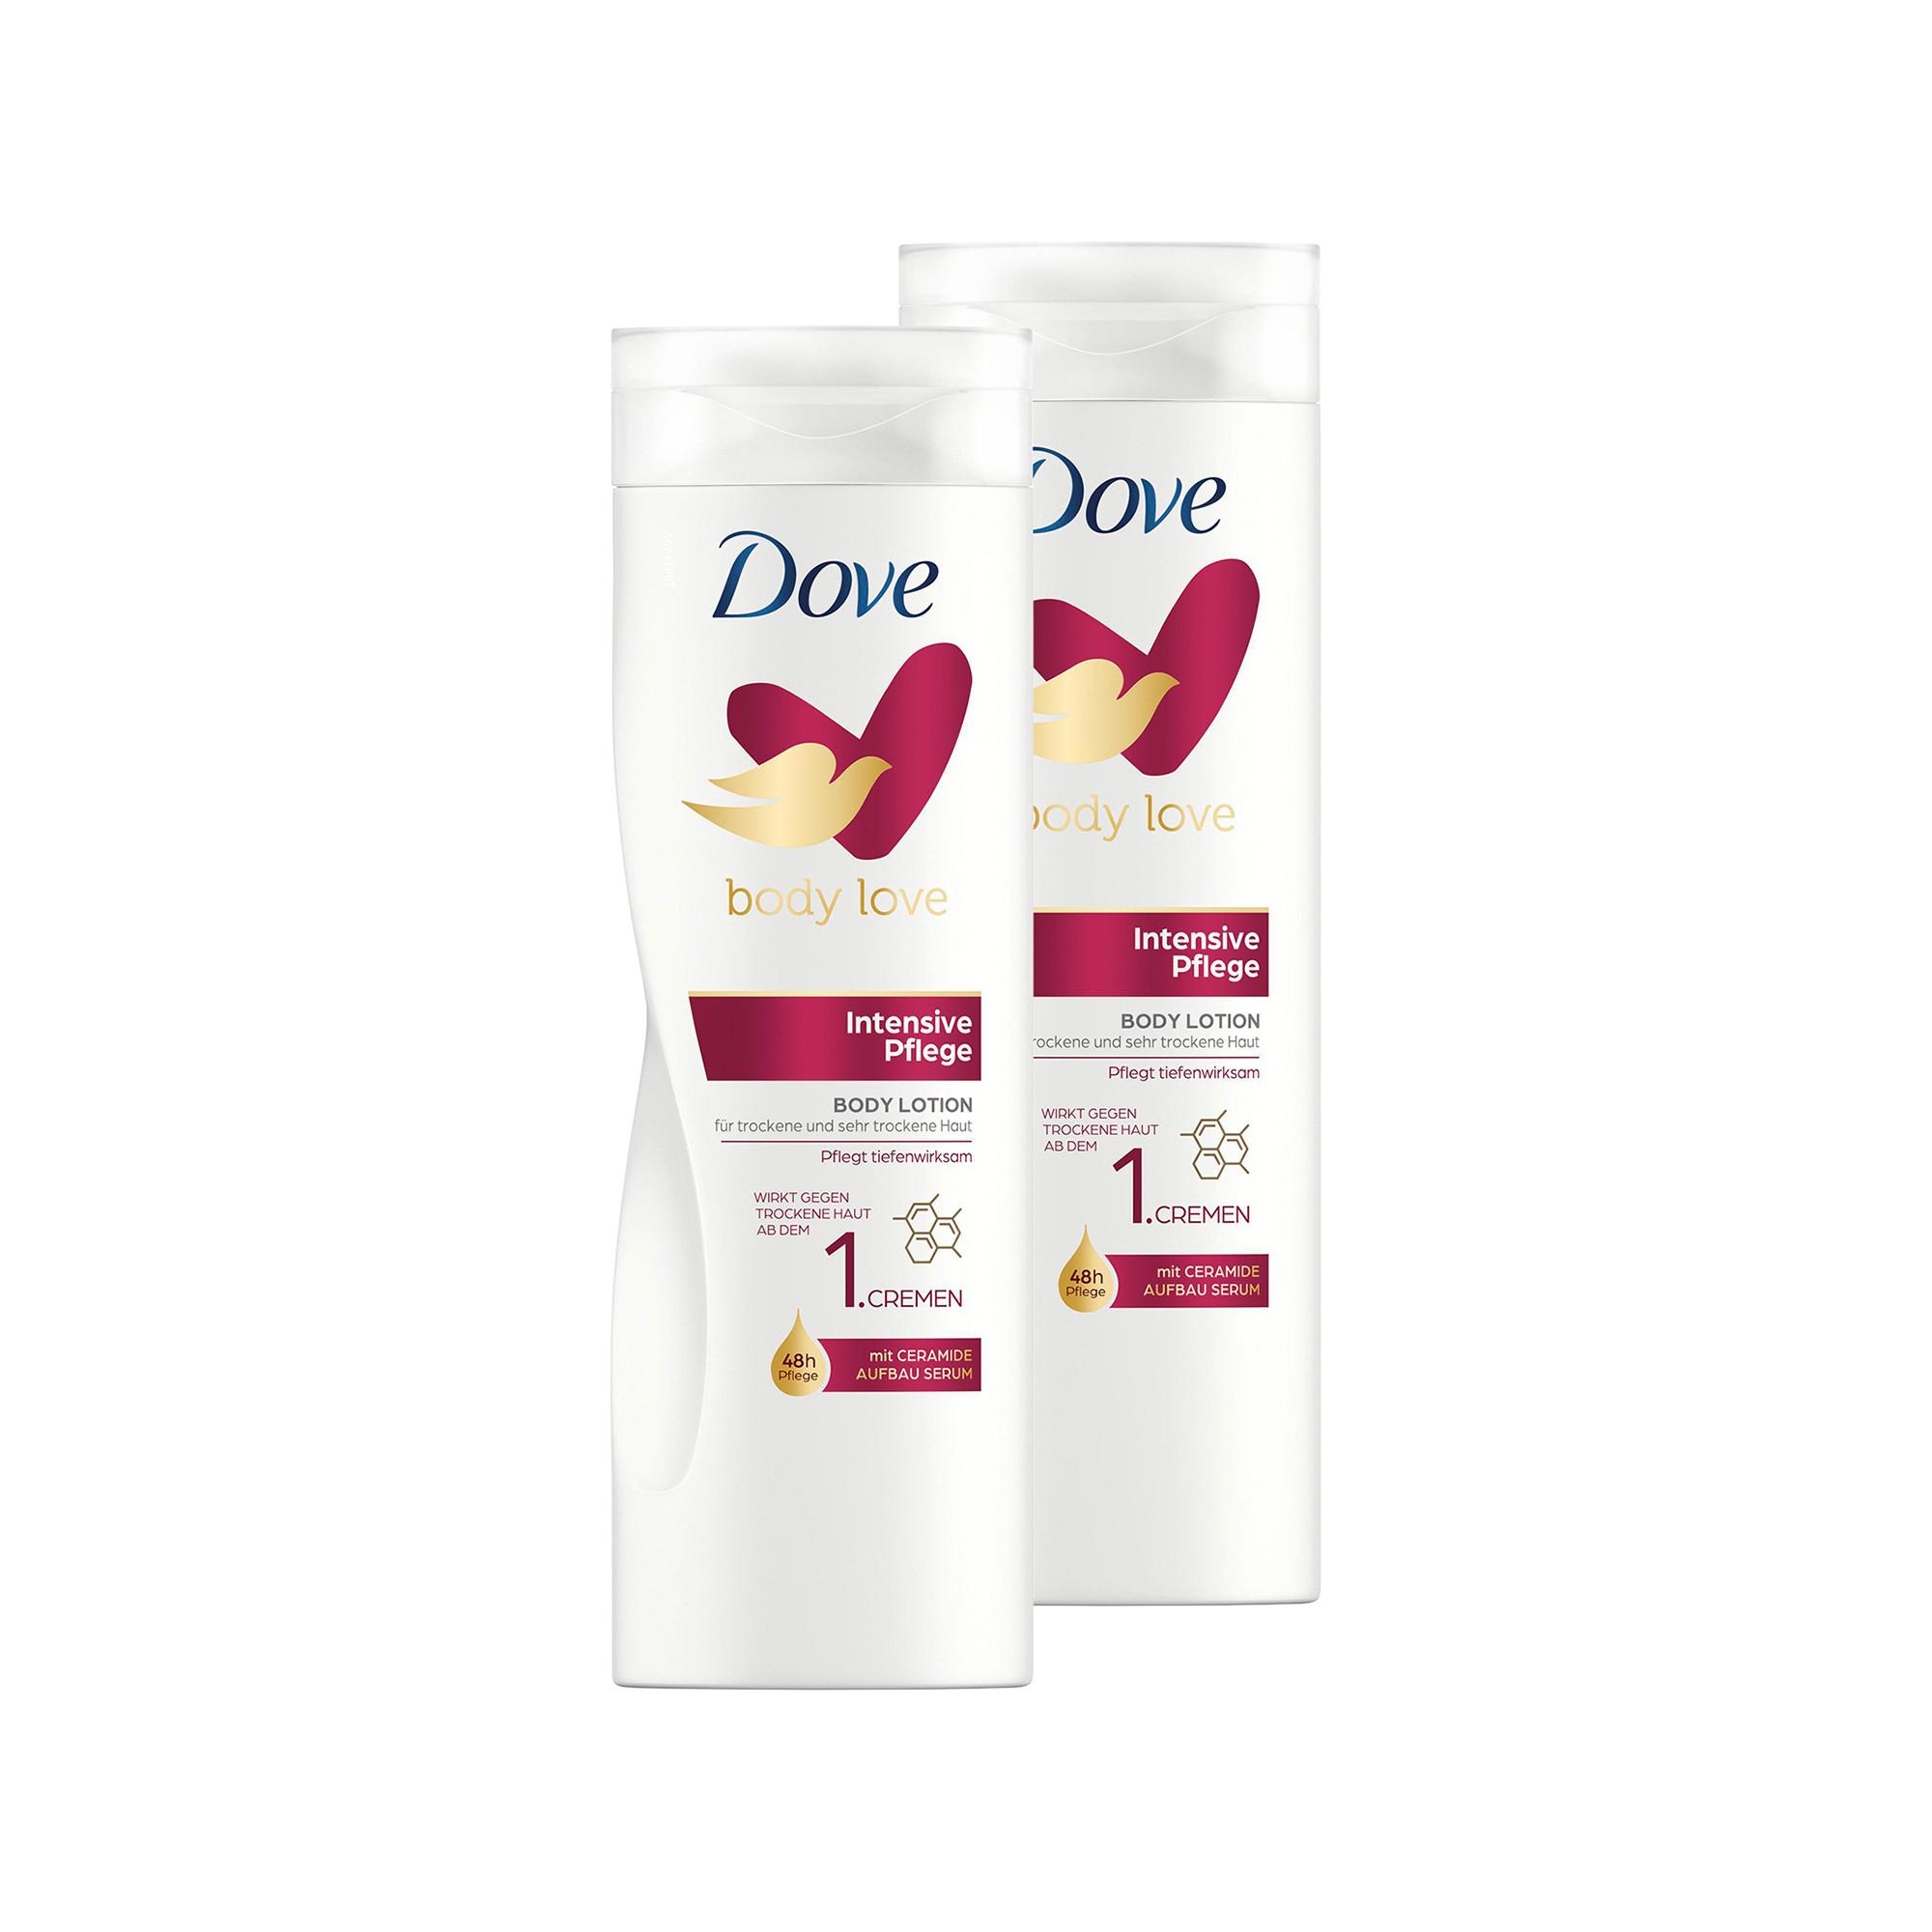 Dove Soins intensifs Body Lotion DUO 